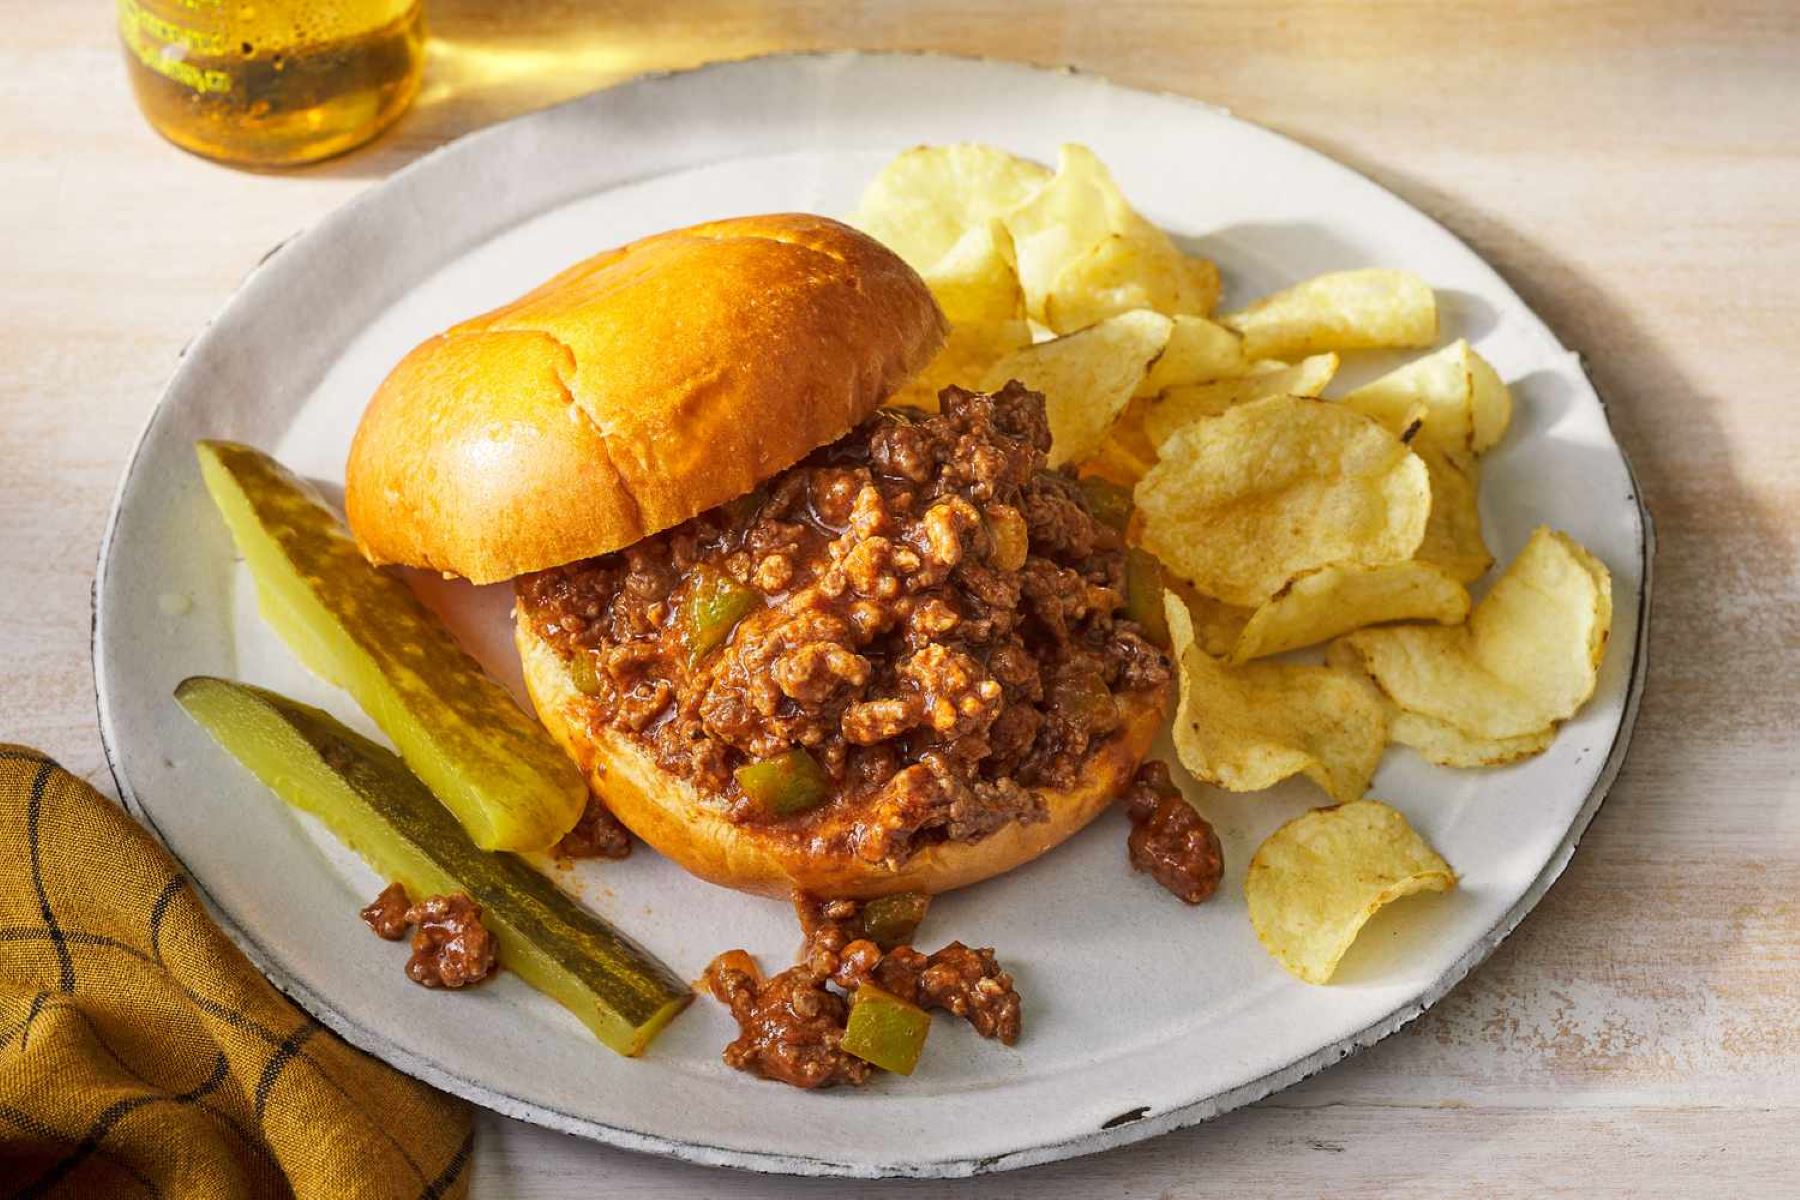 Delicious And Creative Sides To Pair With Sloppy Joes